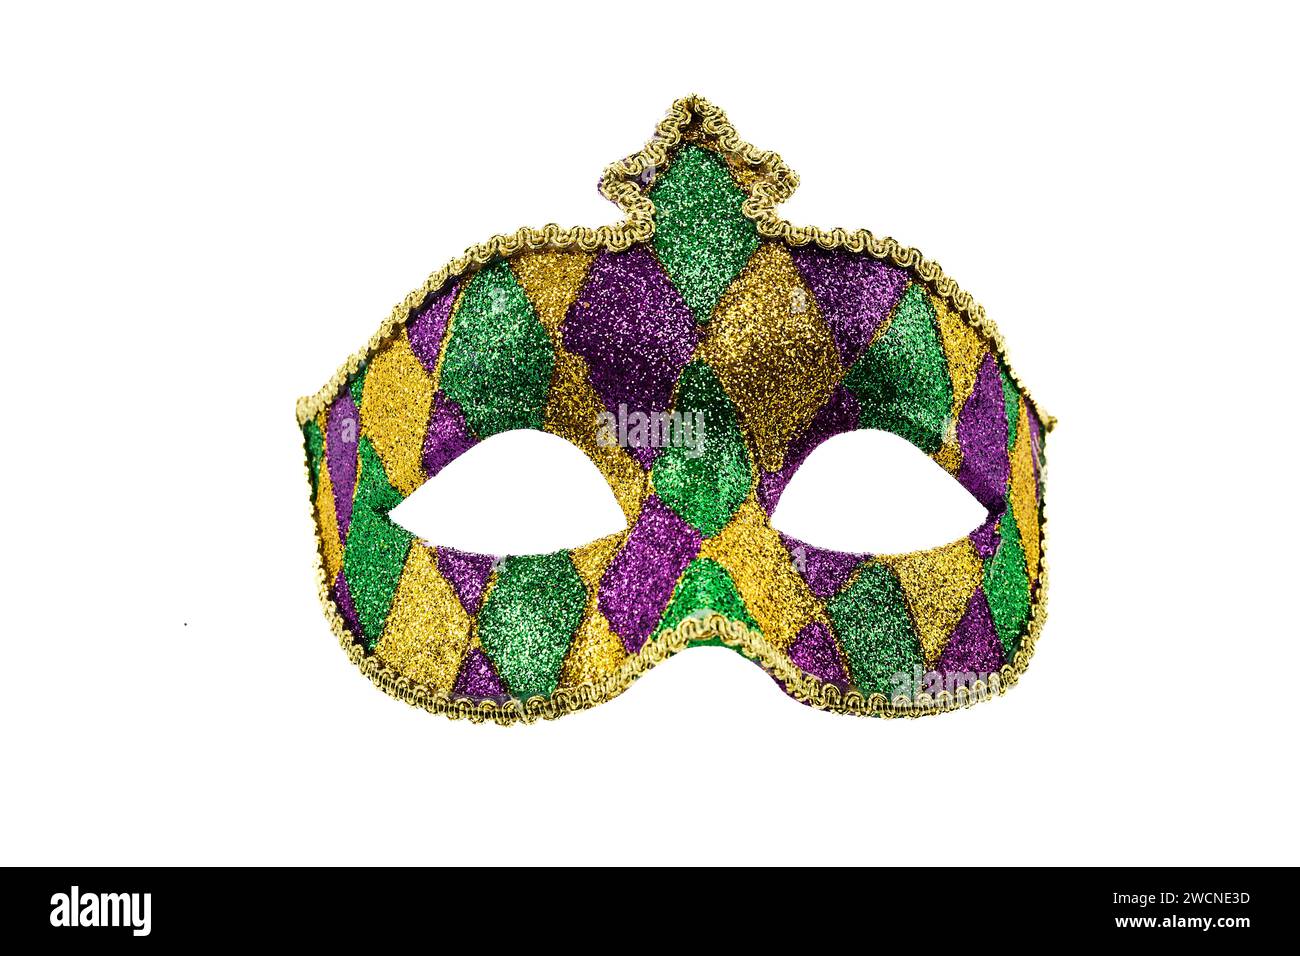 Gold, purple and green glittery Mardi gras mask isolated on white background Stock Photo